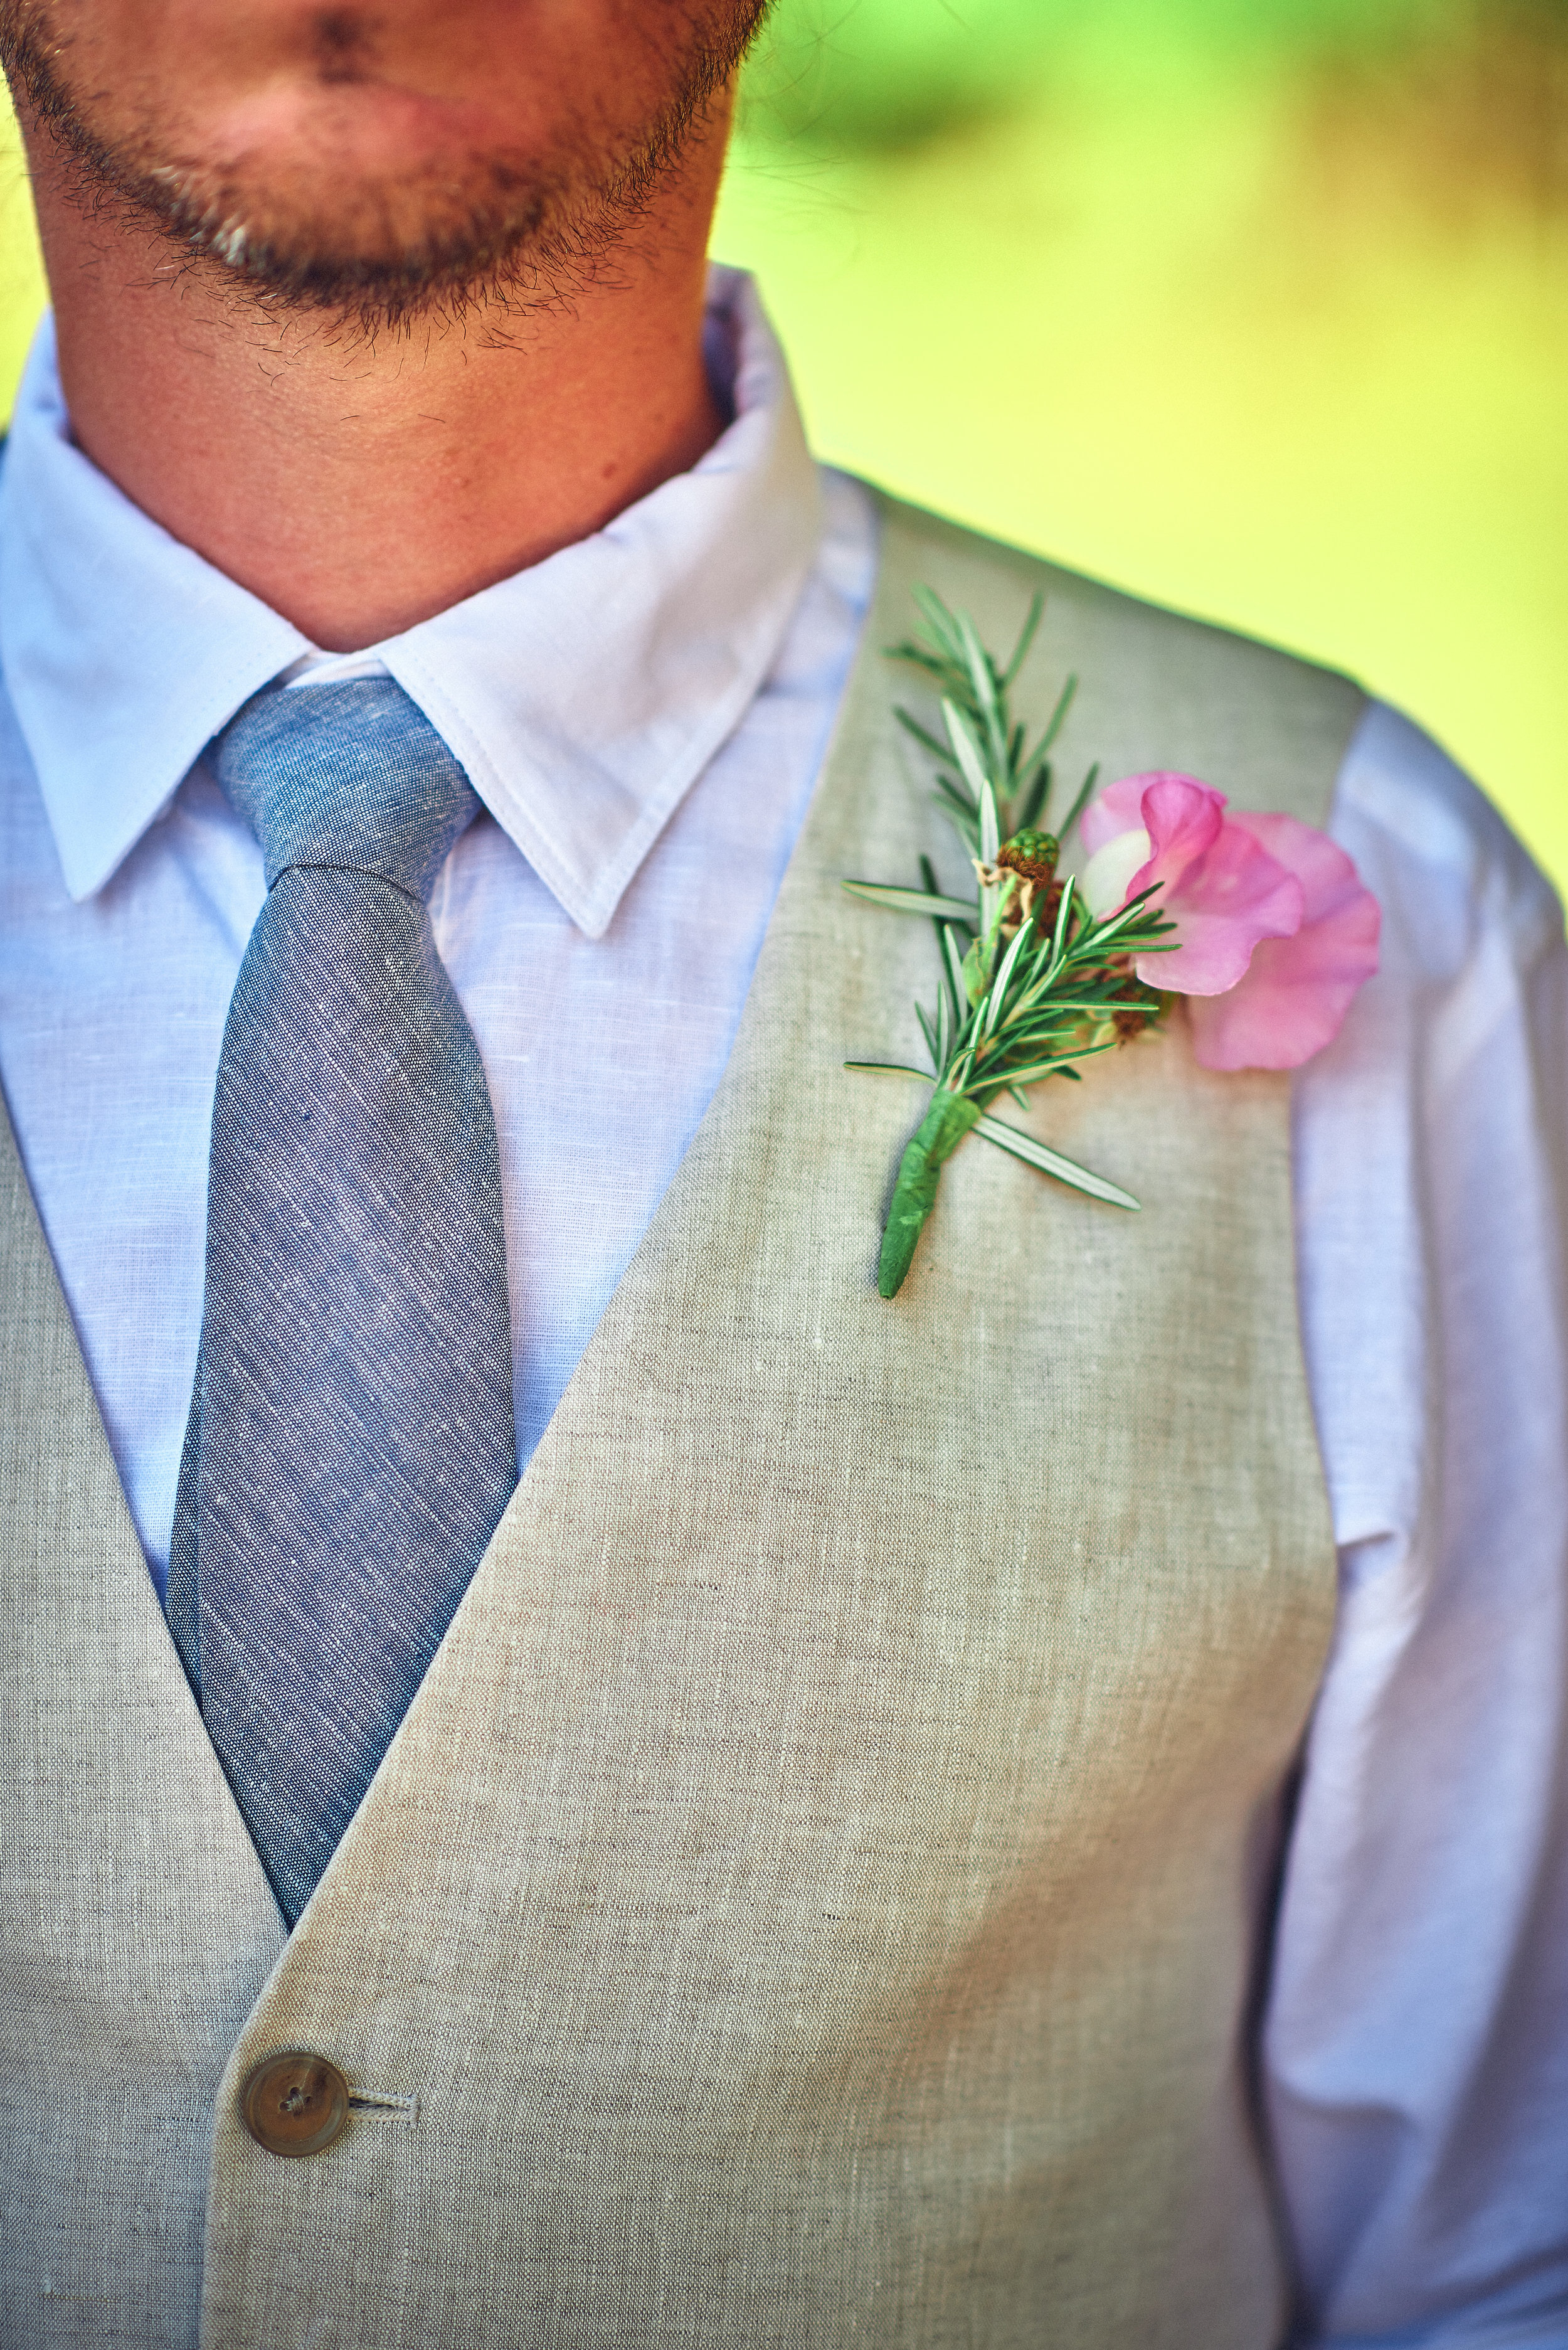 pea and rosemary at groom details at plum nelli farm wedding.jpg